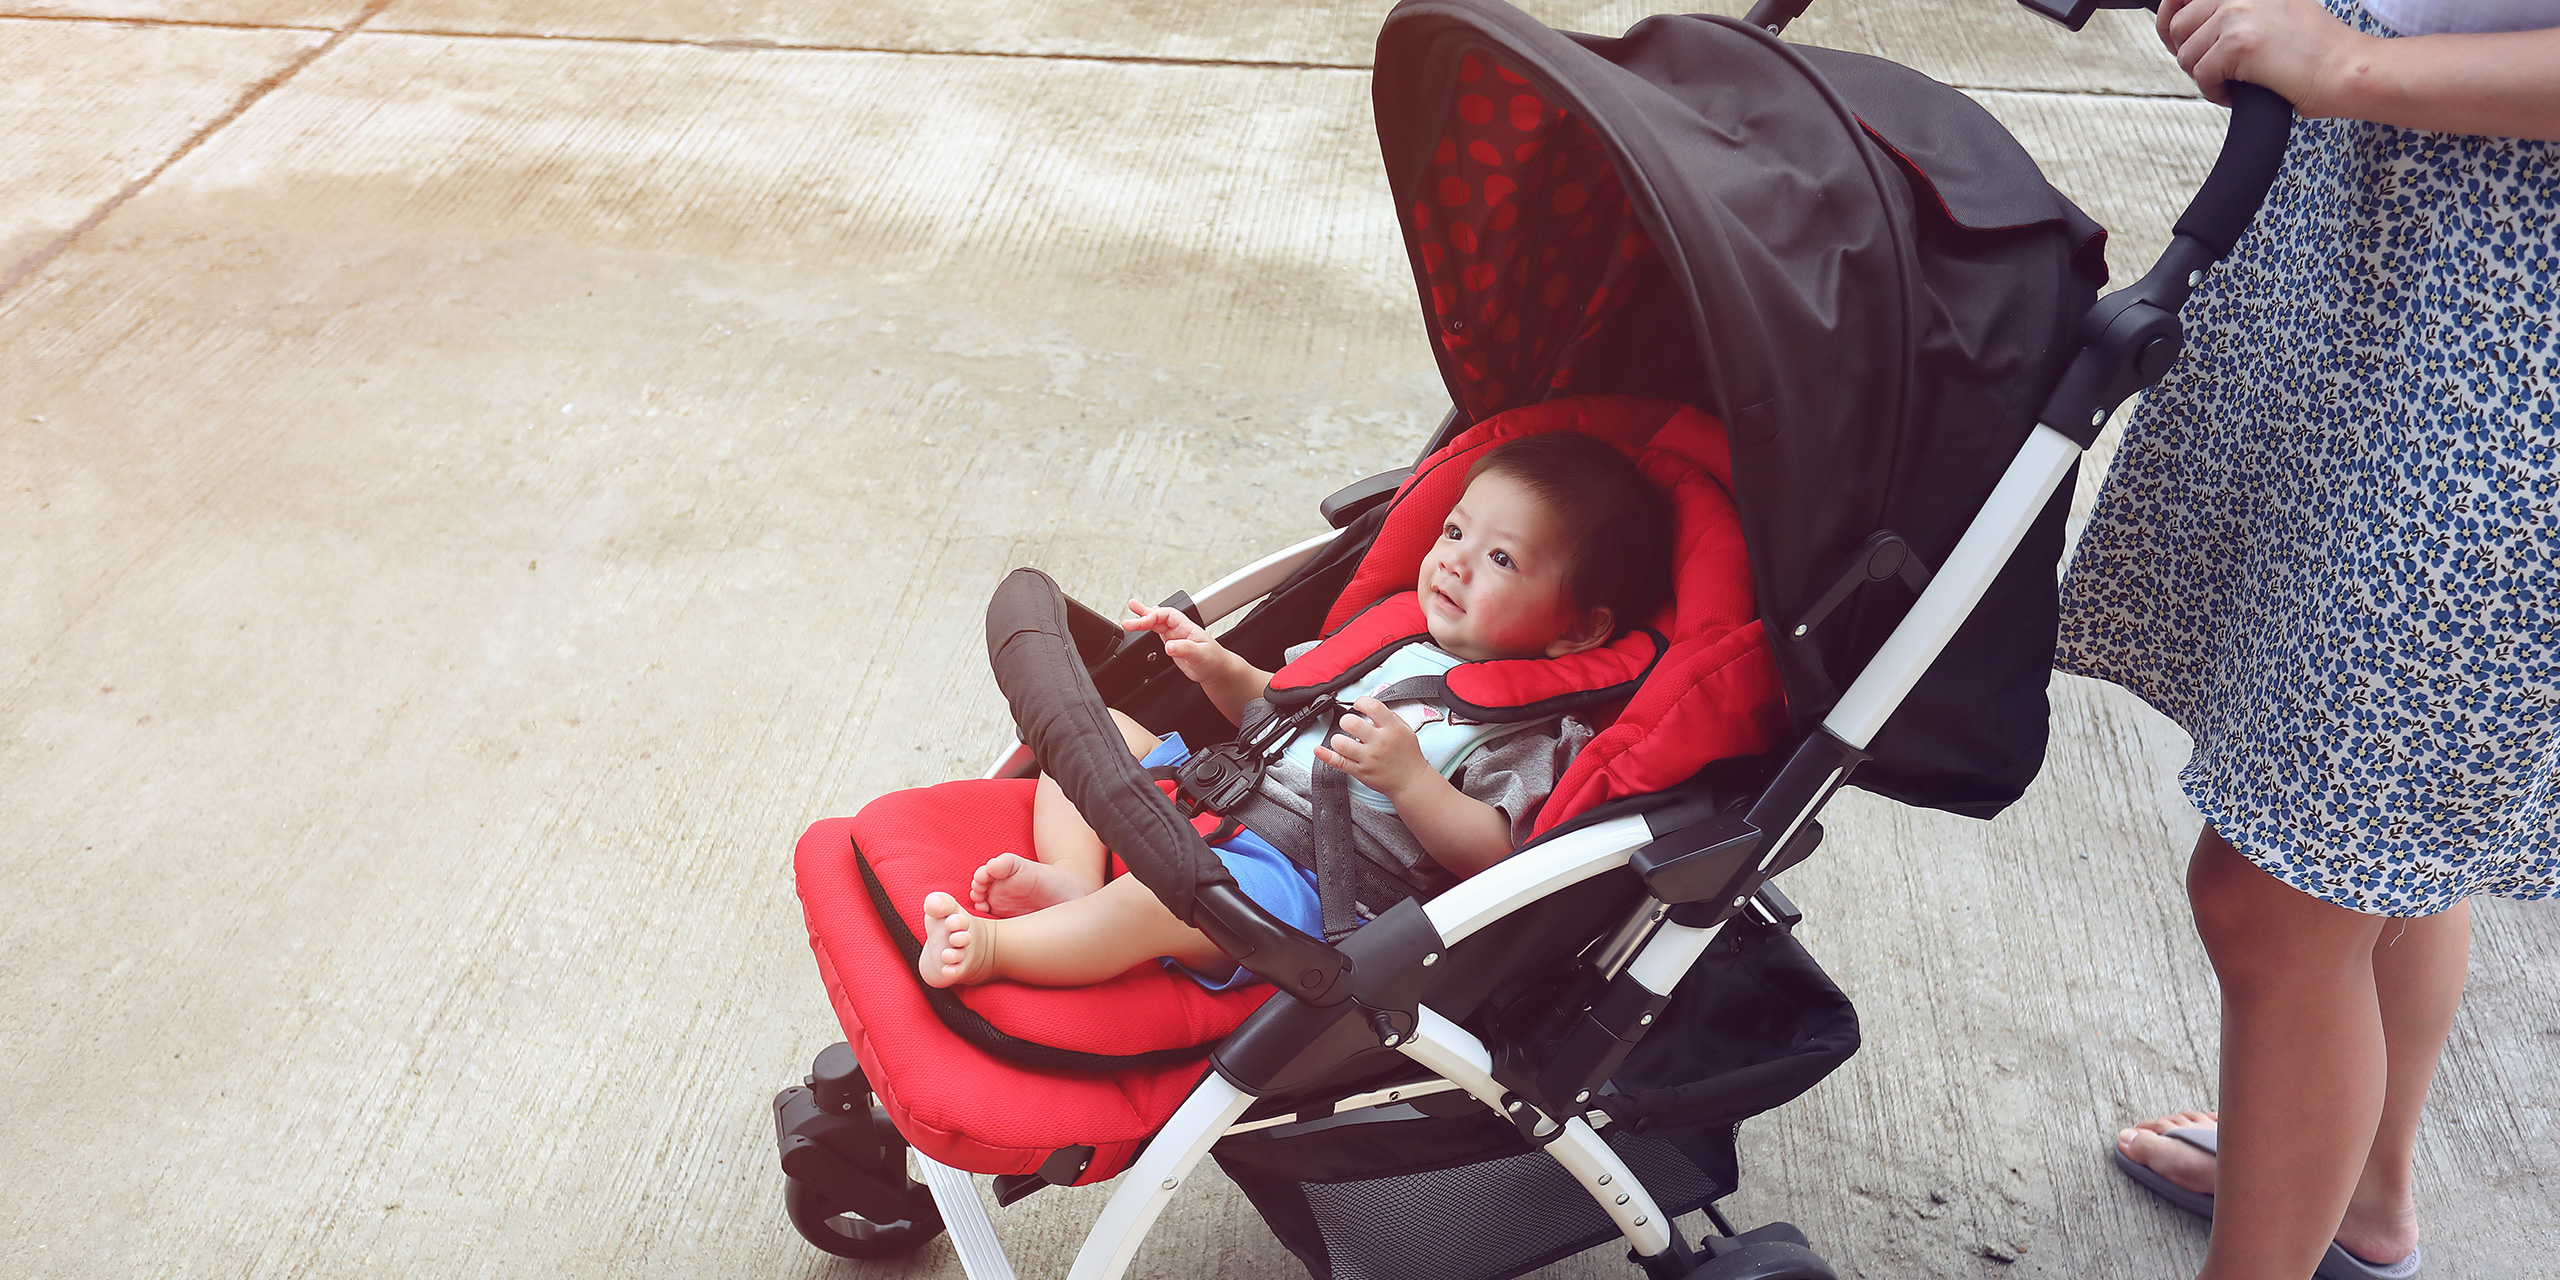 stroller for 7 month old baby